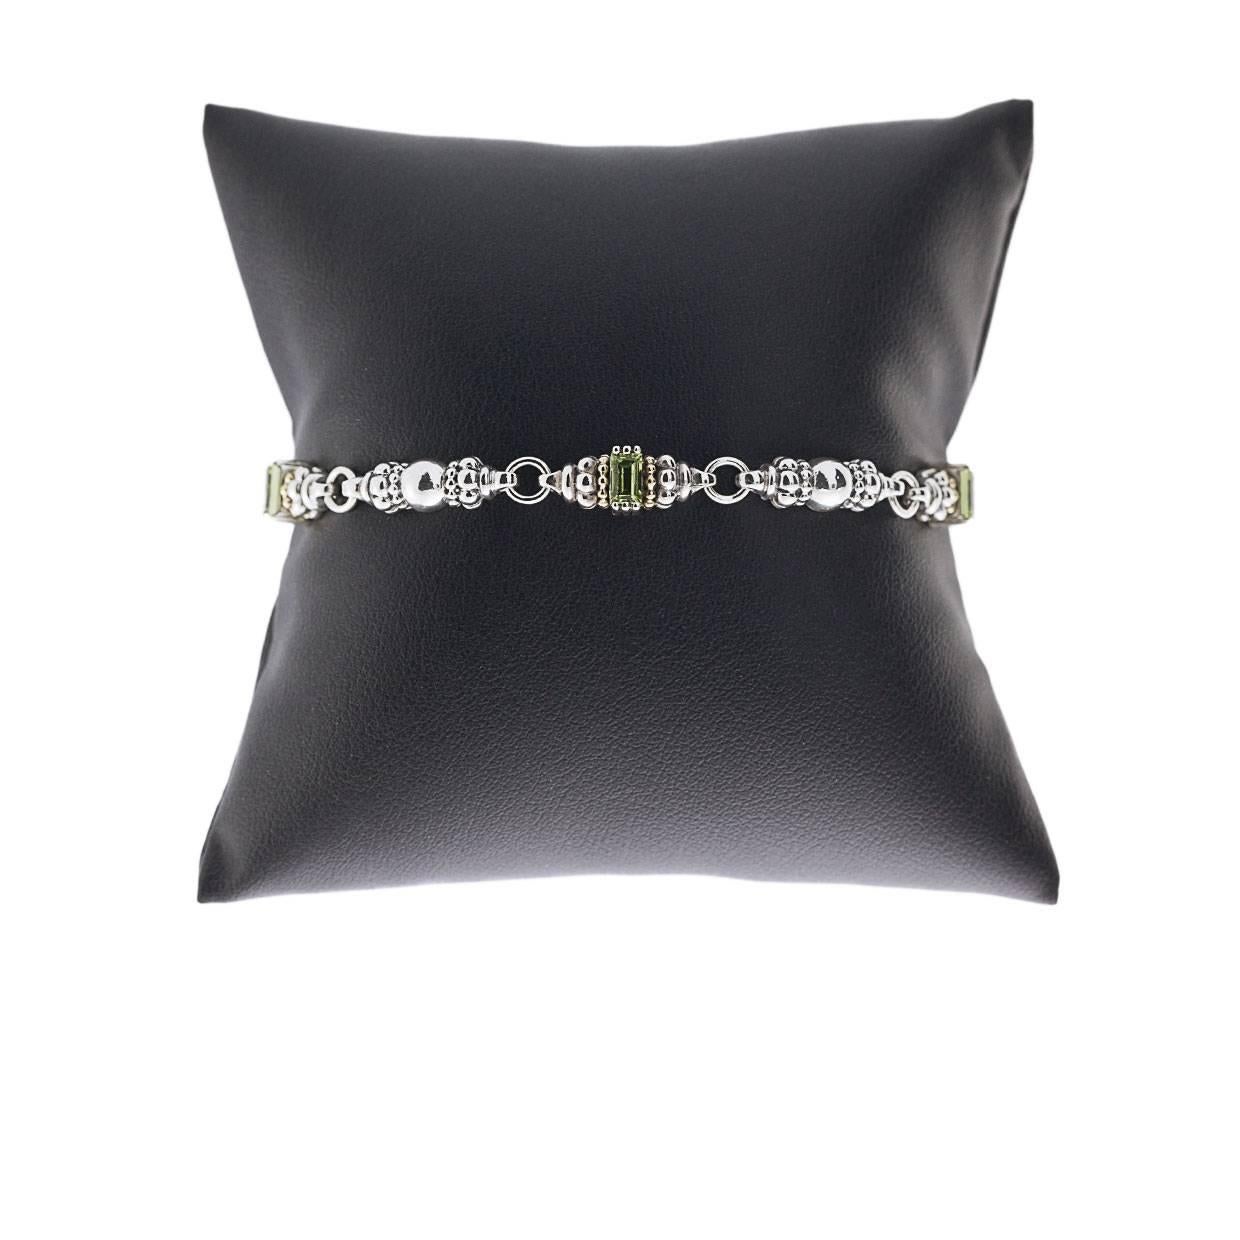 Details:
Sterling silver with 18K yellow gold accents
5 Baguette-cut Peridot stations
Comes in a beautiful presentation box
An adult signature will be required for delivery unless other arrangements are made prior to purchasing